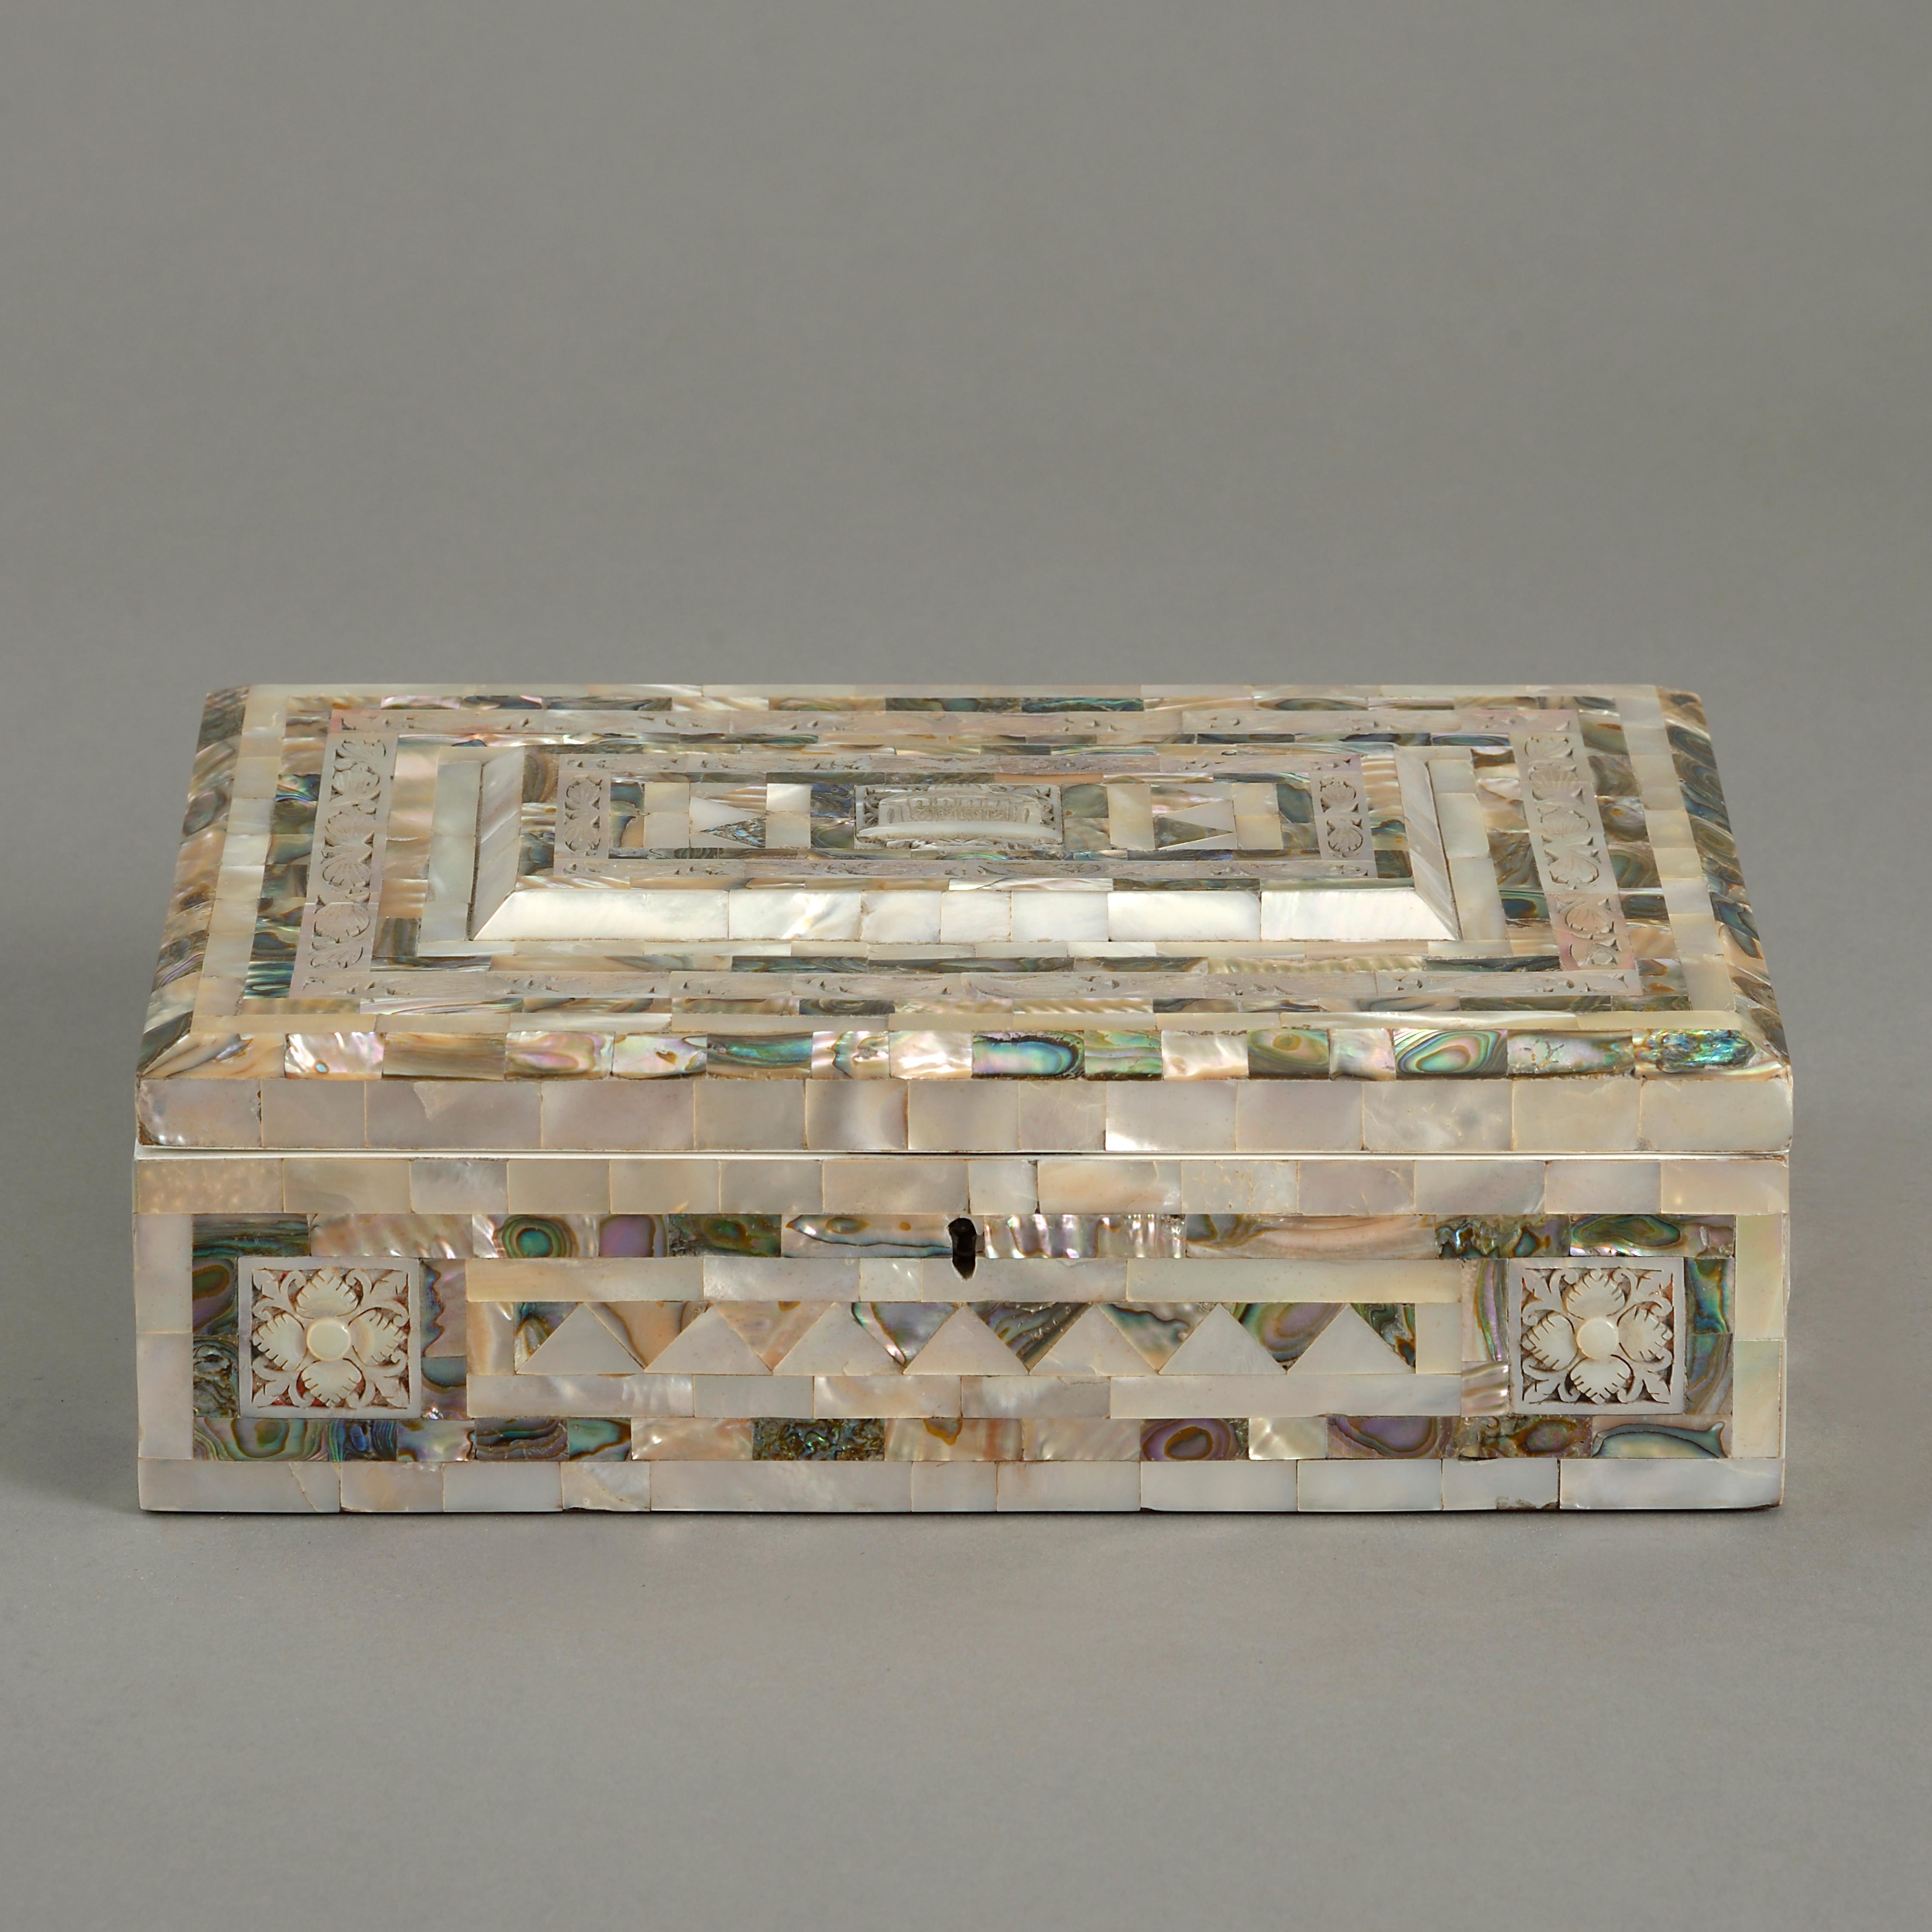 An early 20th century jewelry box of rectangular form, veneered throughout in carved and polished mother of pearl panels, opening to reveal the original pink silk lined interior.